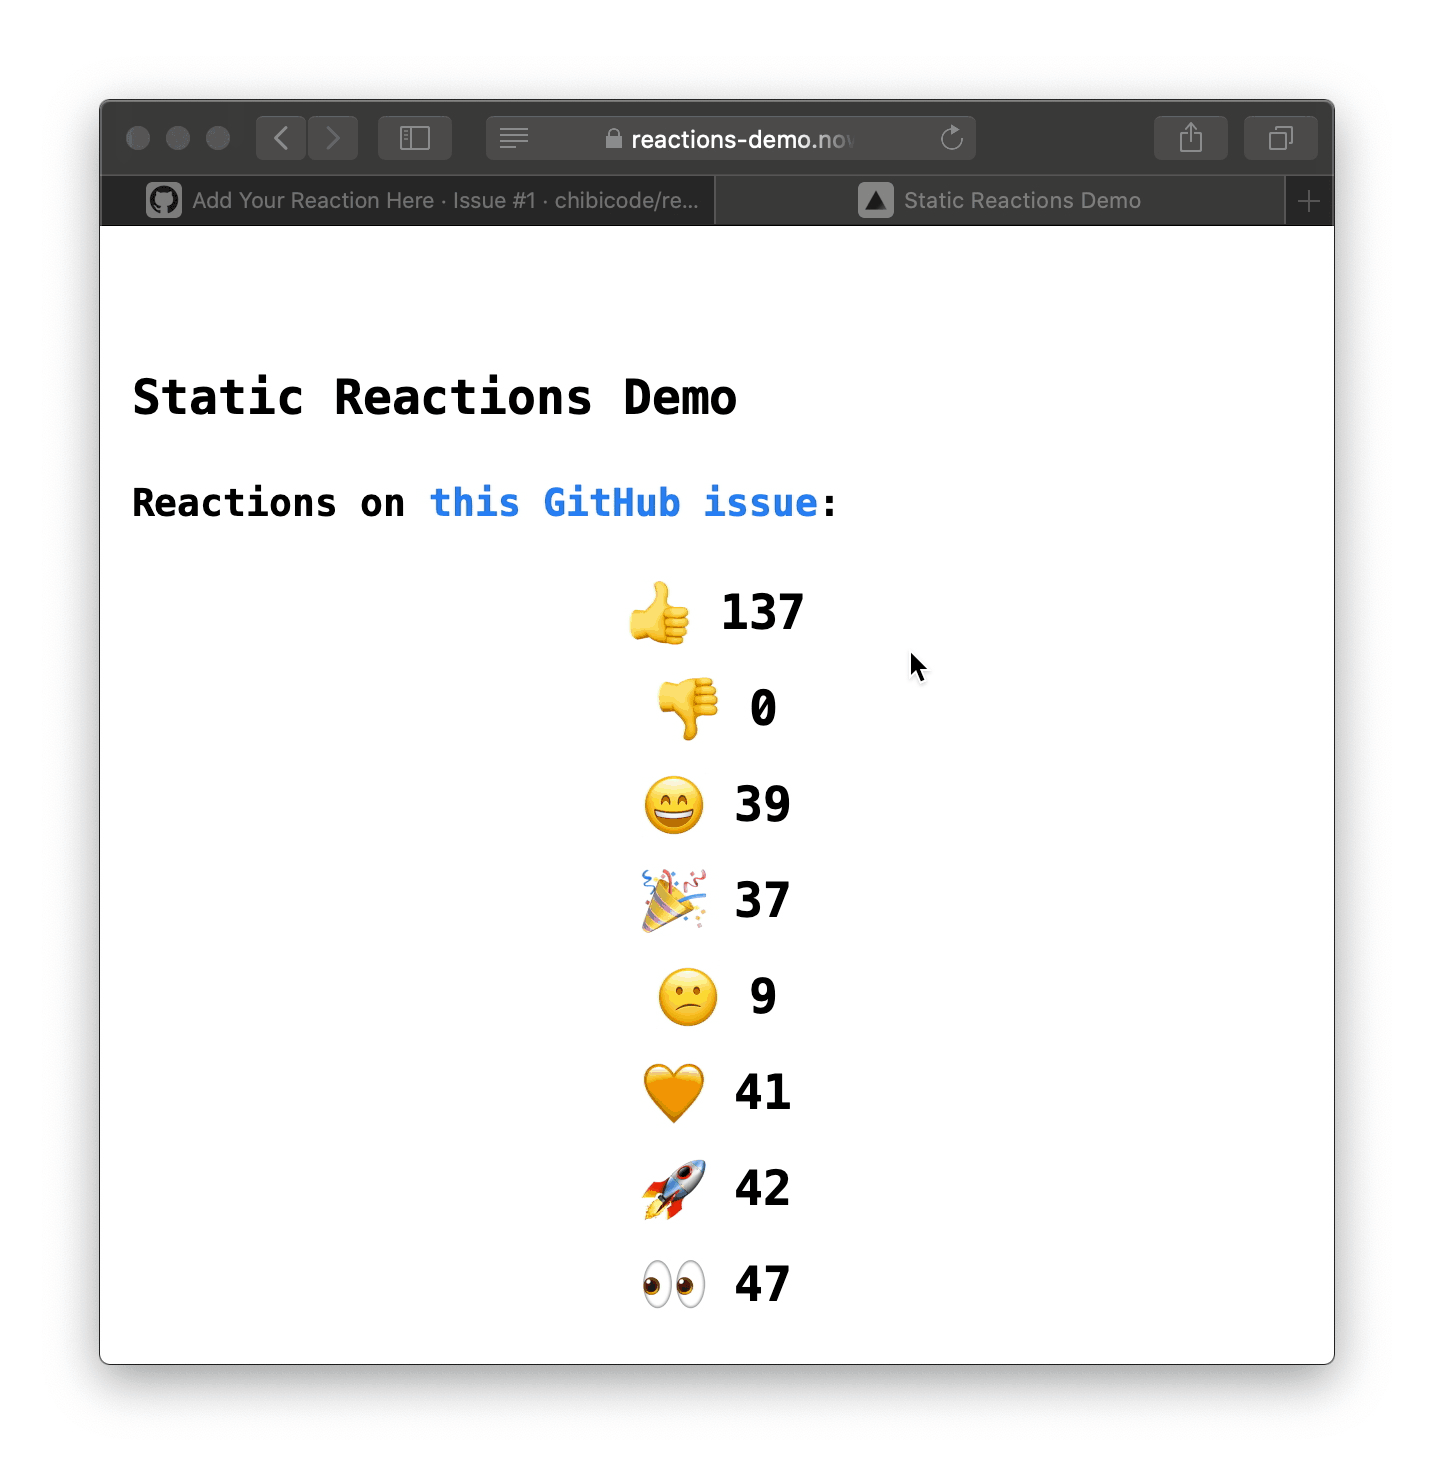 After the first visit following our emoji reaction, a new page generation kicks off in the background. Every single request throughout is served from static cache.